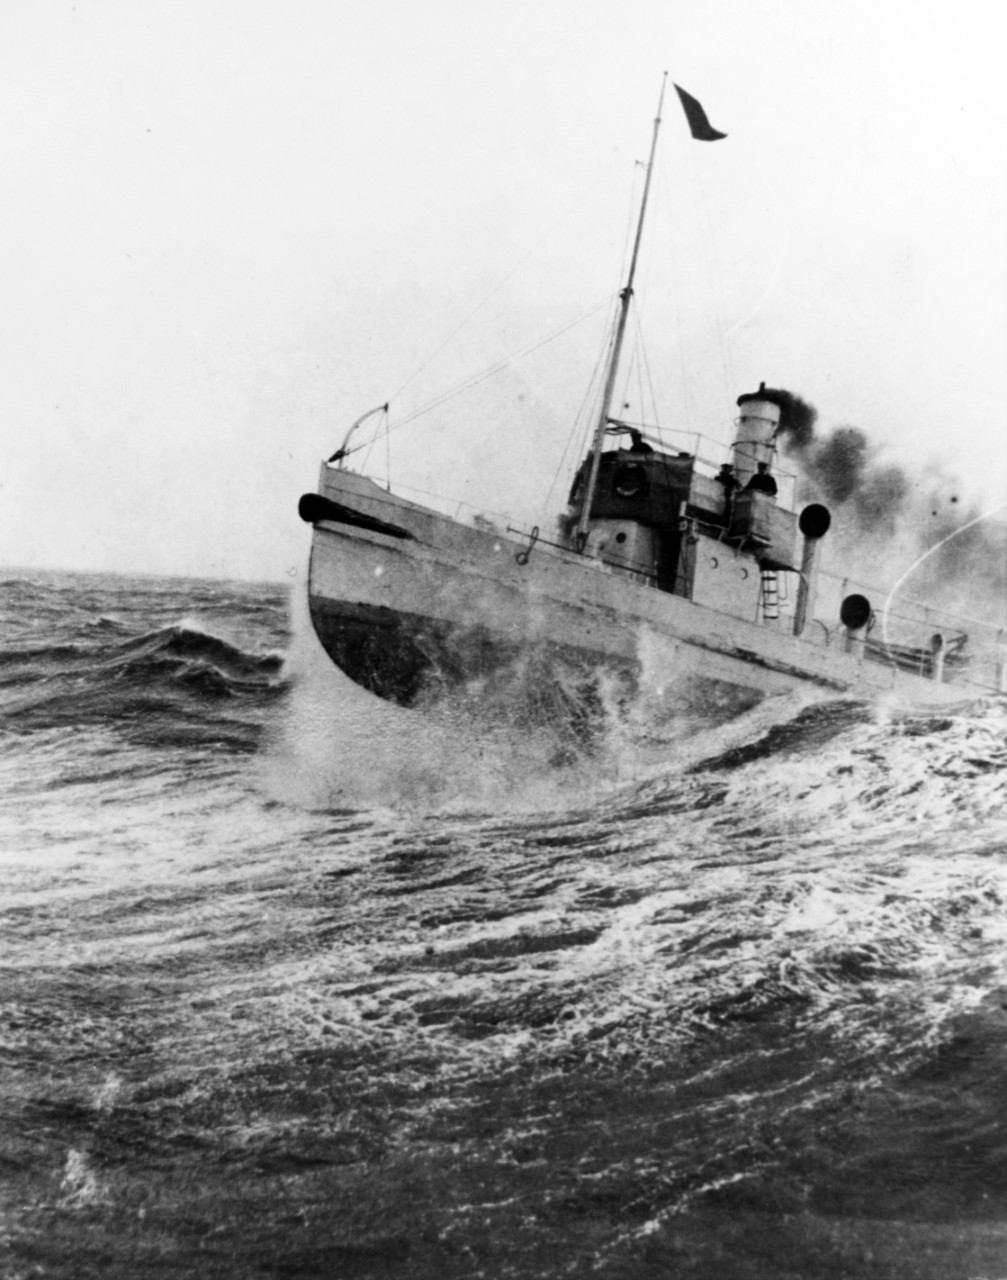 German police boat in about 1915-1916.